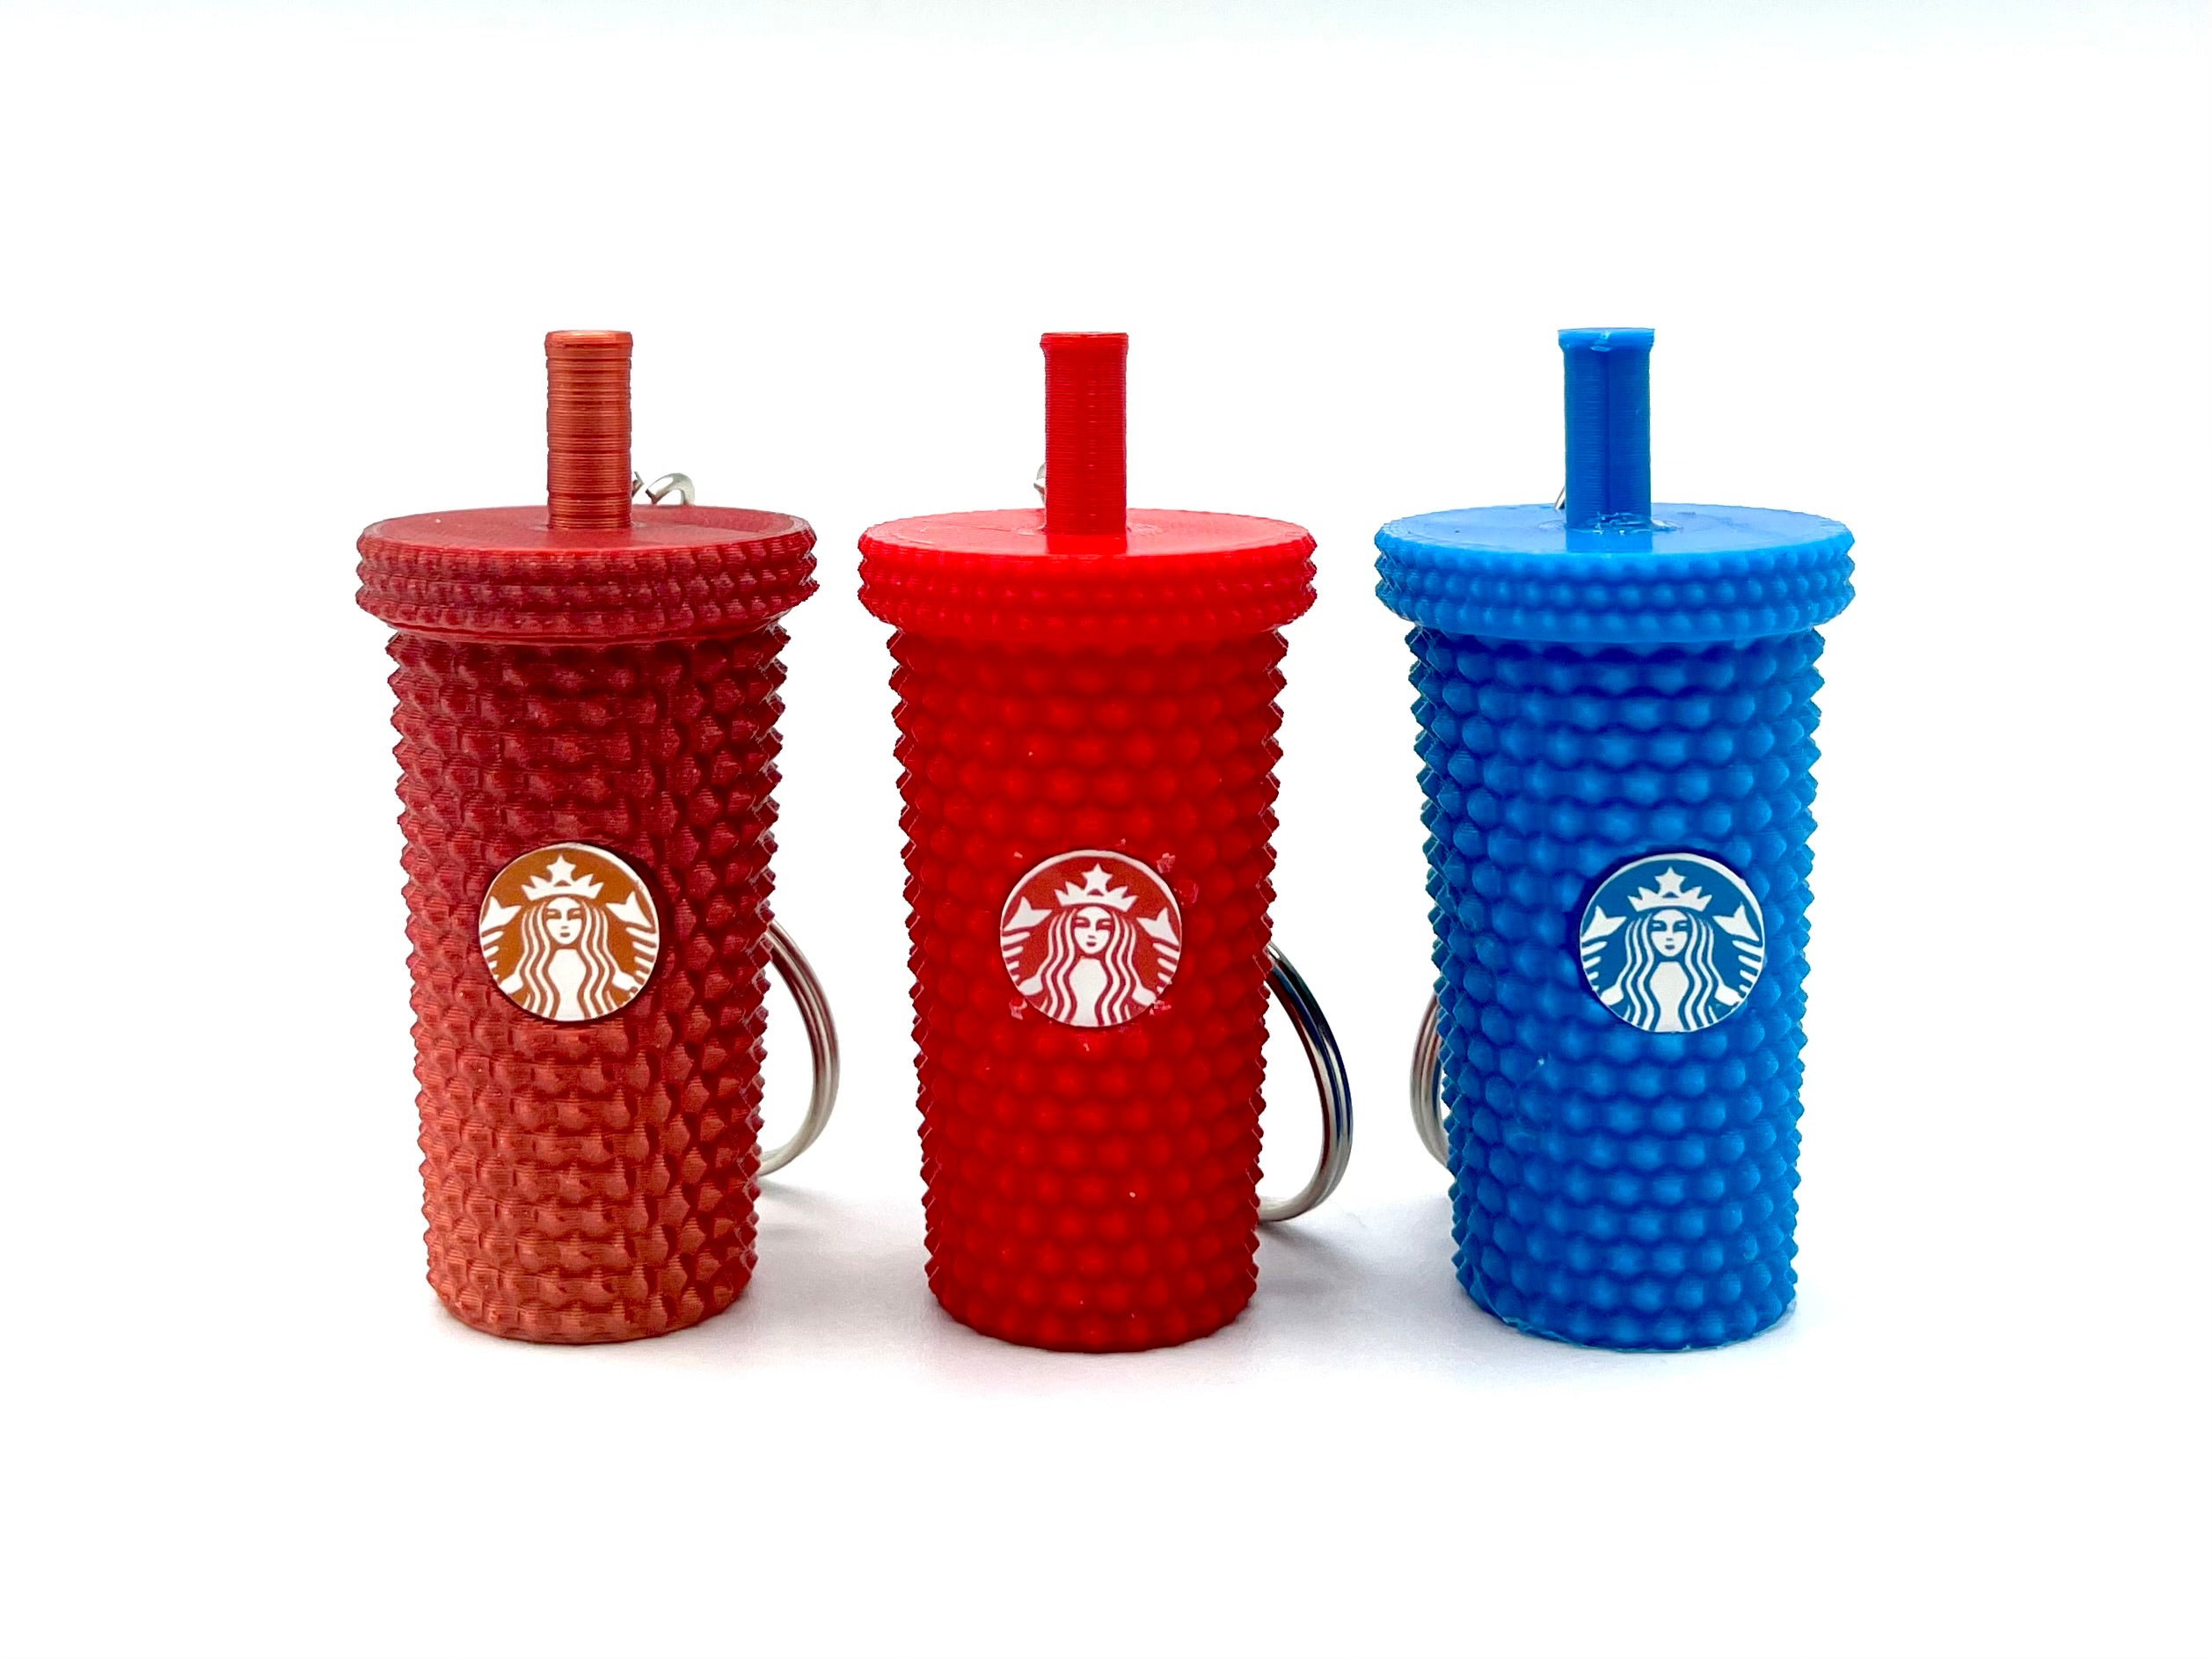 Mini Studded Tumbler and Stanley Tumbler Keychains/2 Pack 